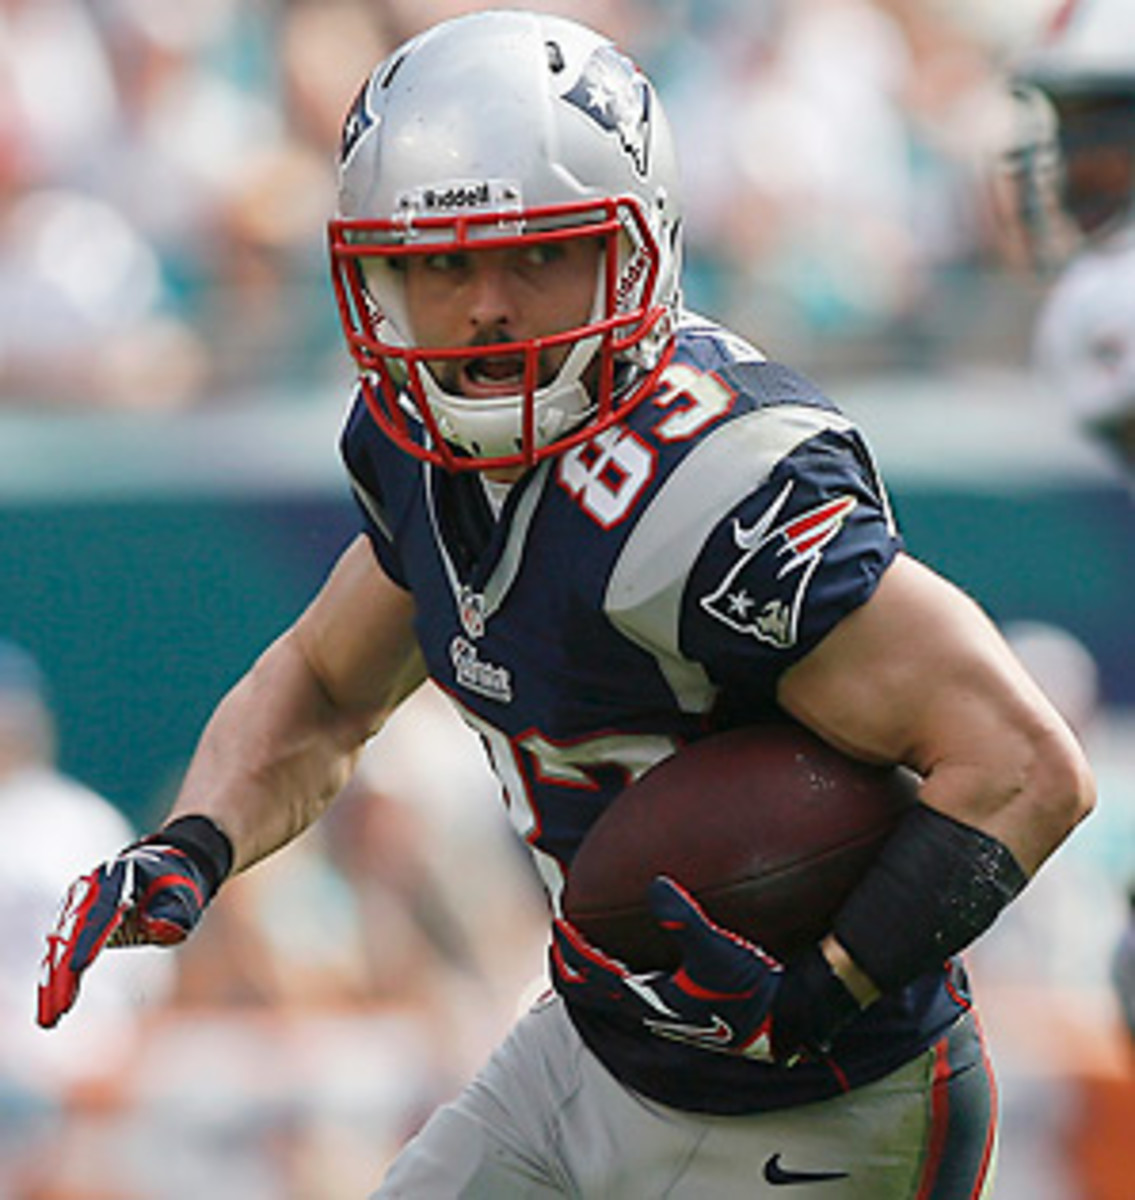 Wes Welker now has 92 catches for 1,064 yards and 4 TDs this season. (Andrew Innerarity/Reuters)